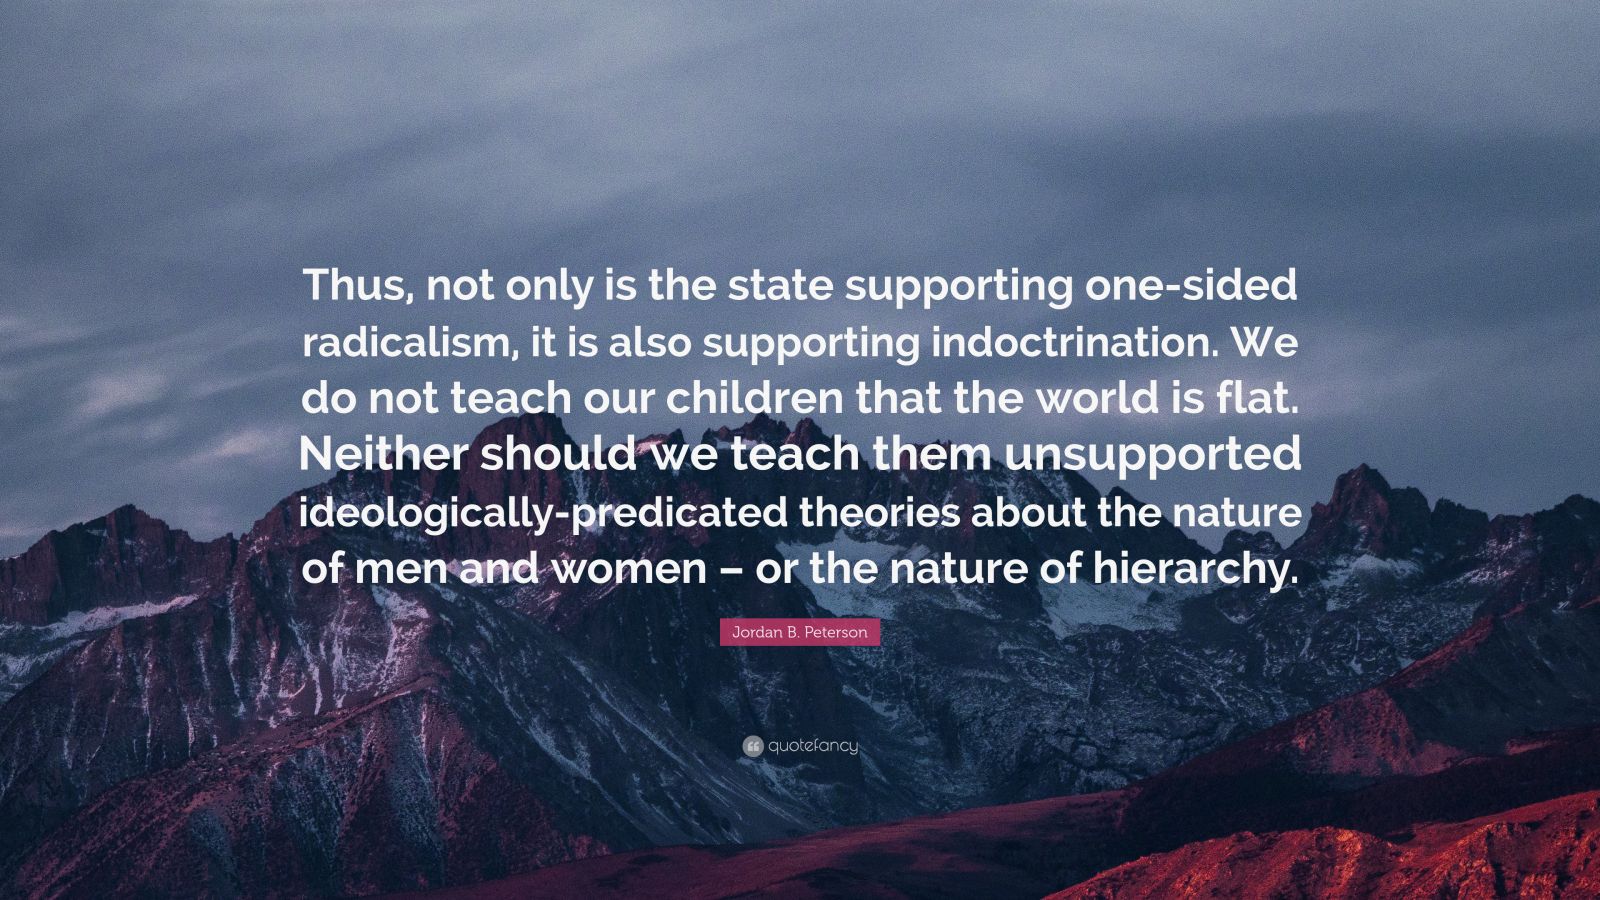 6757925 Jordan B Peterson Quote Thus not only is the state supporting one